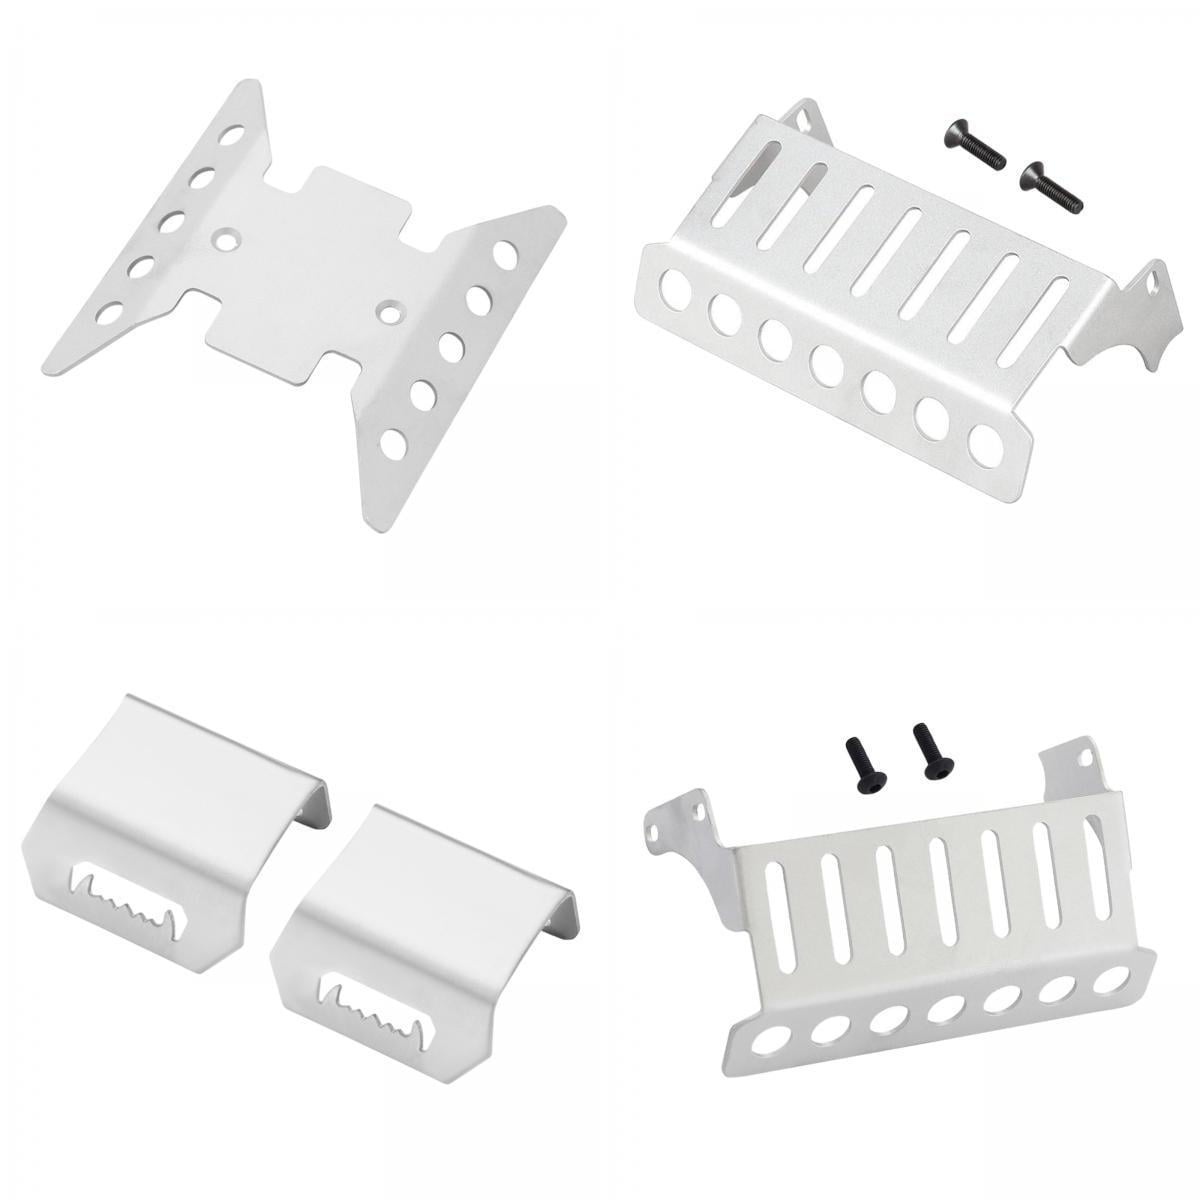 2 Pieces Metal Axle Protective Guard Plate for 1:10 RC Crawler Axial SCX10II 